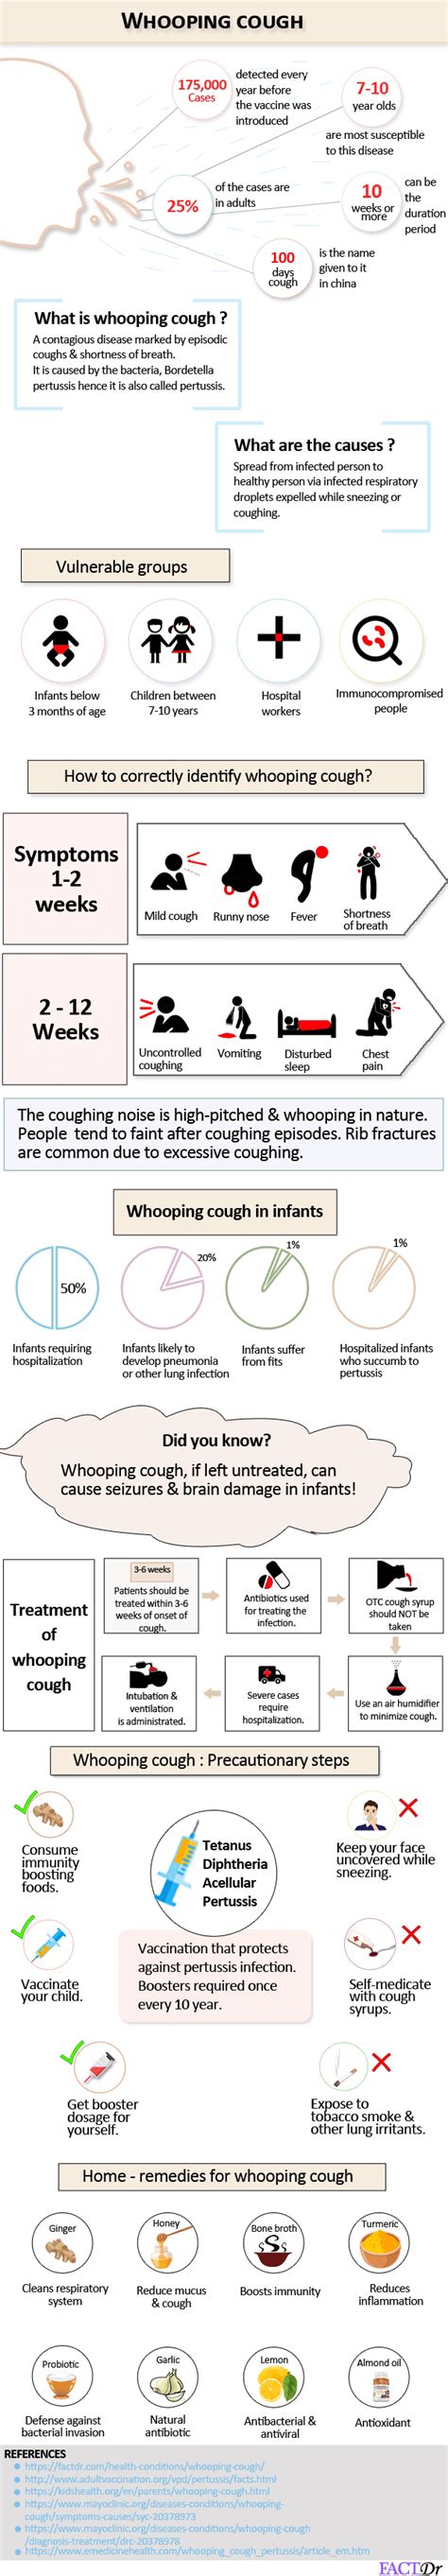 whooping cough symptoms treatment prevention home remedies factdr